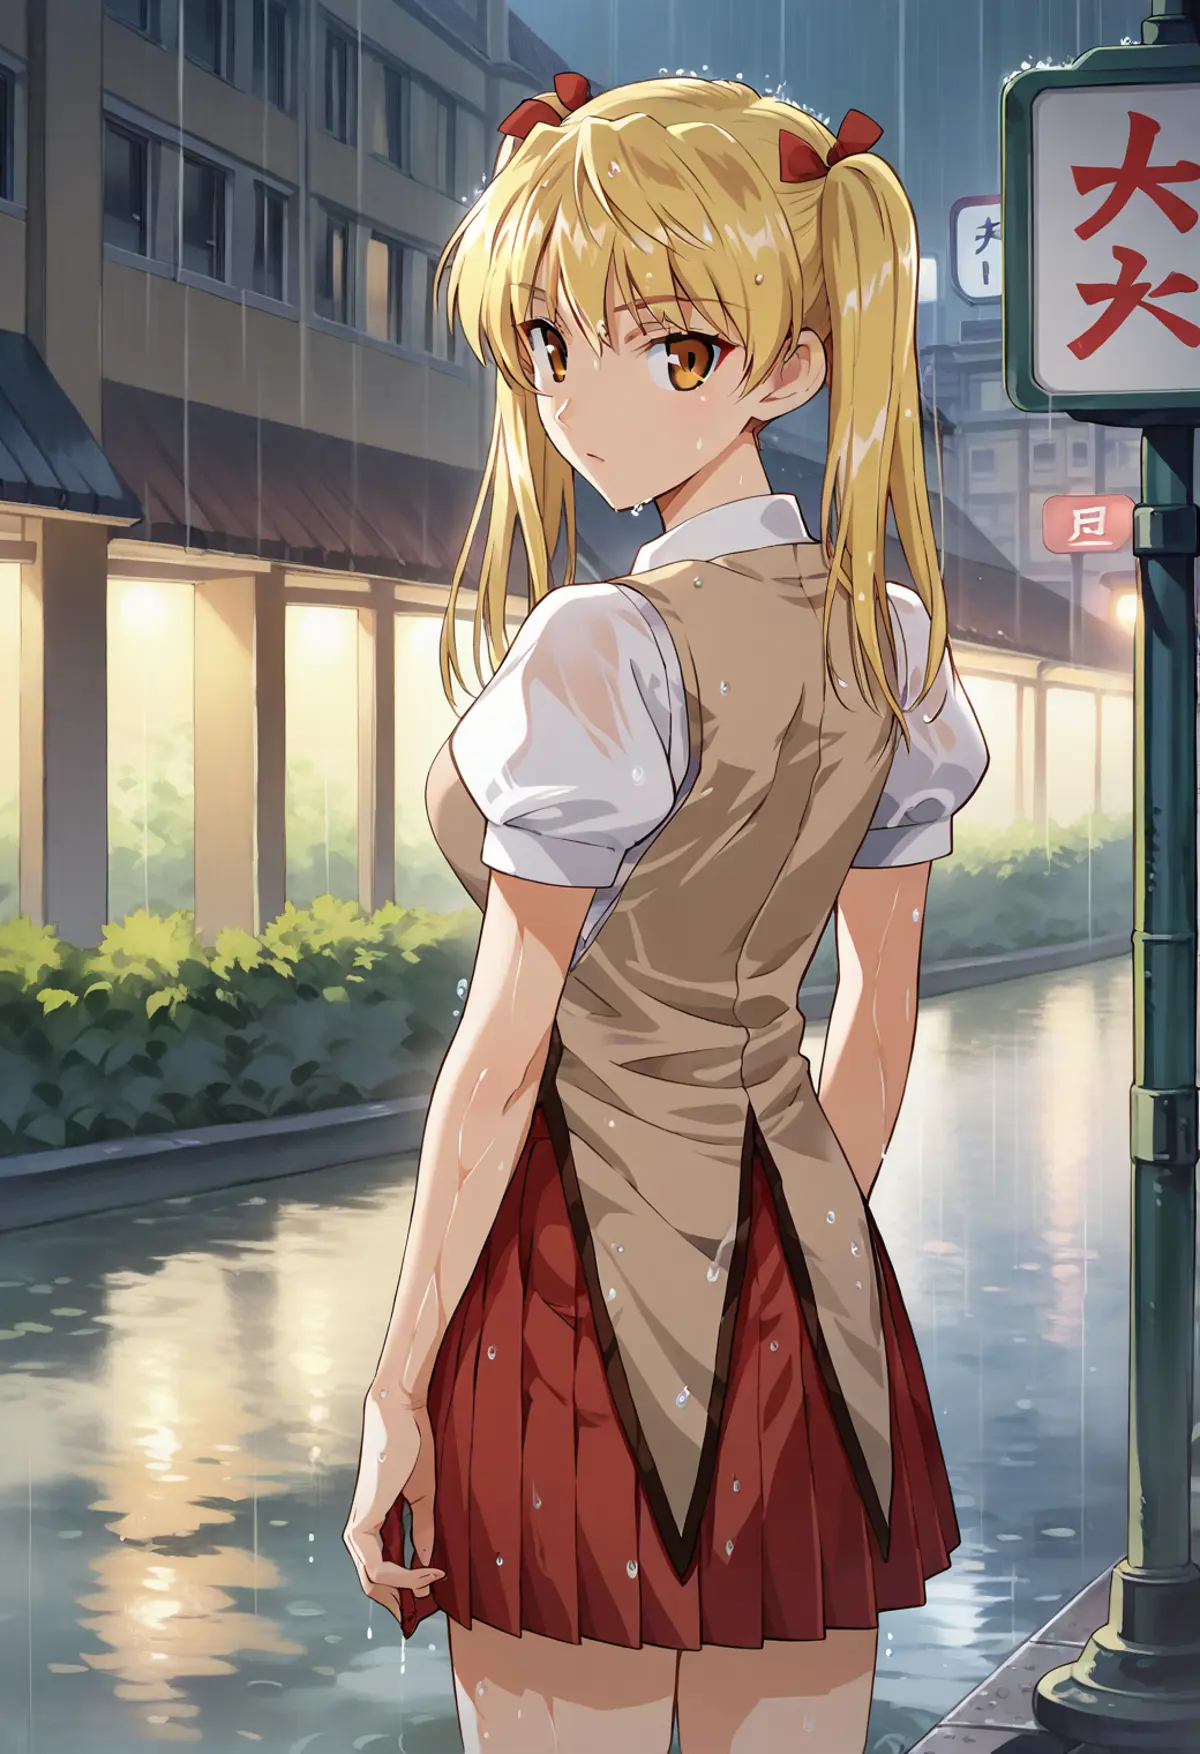 A young woman with blonde hair tied in twin tails drenched in rain standing on a wet street looking over her shoulder. The scene is illuminated by the glowing of streetlights and the glow of the surrounding buildings. 